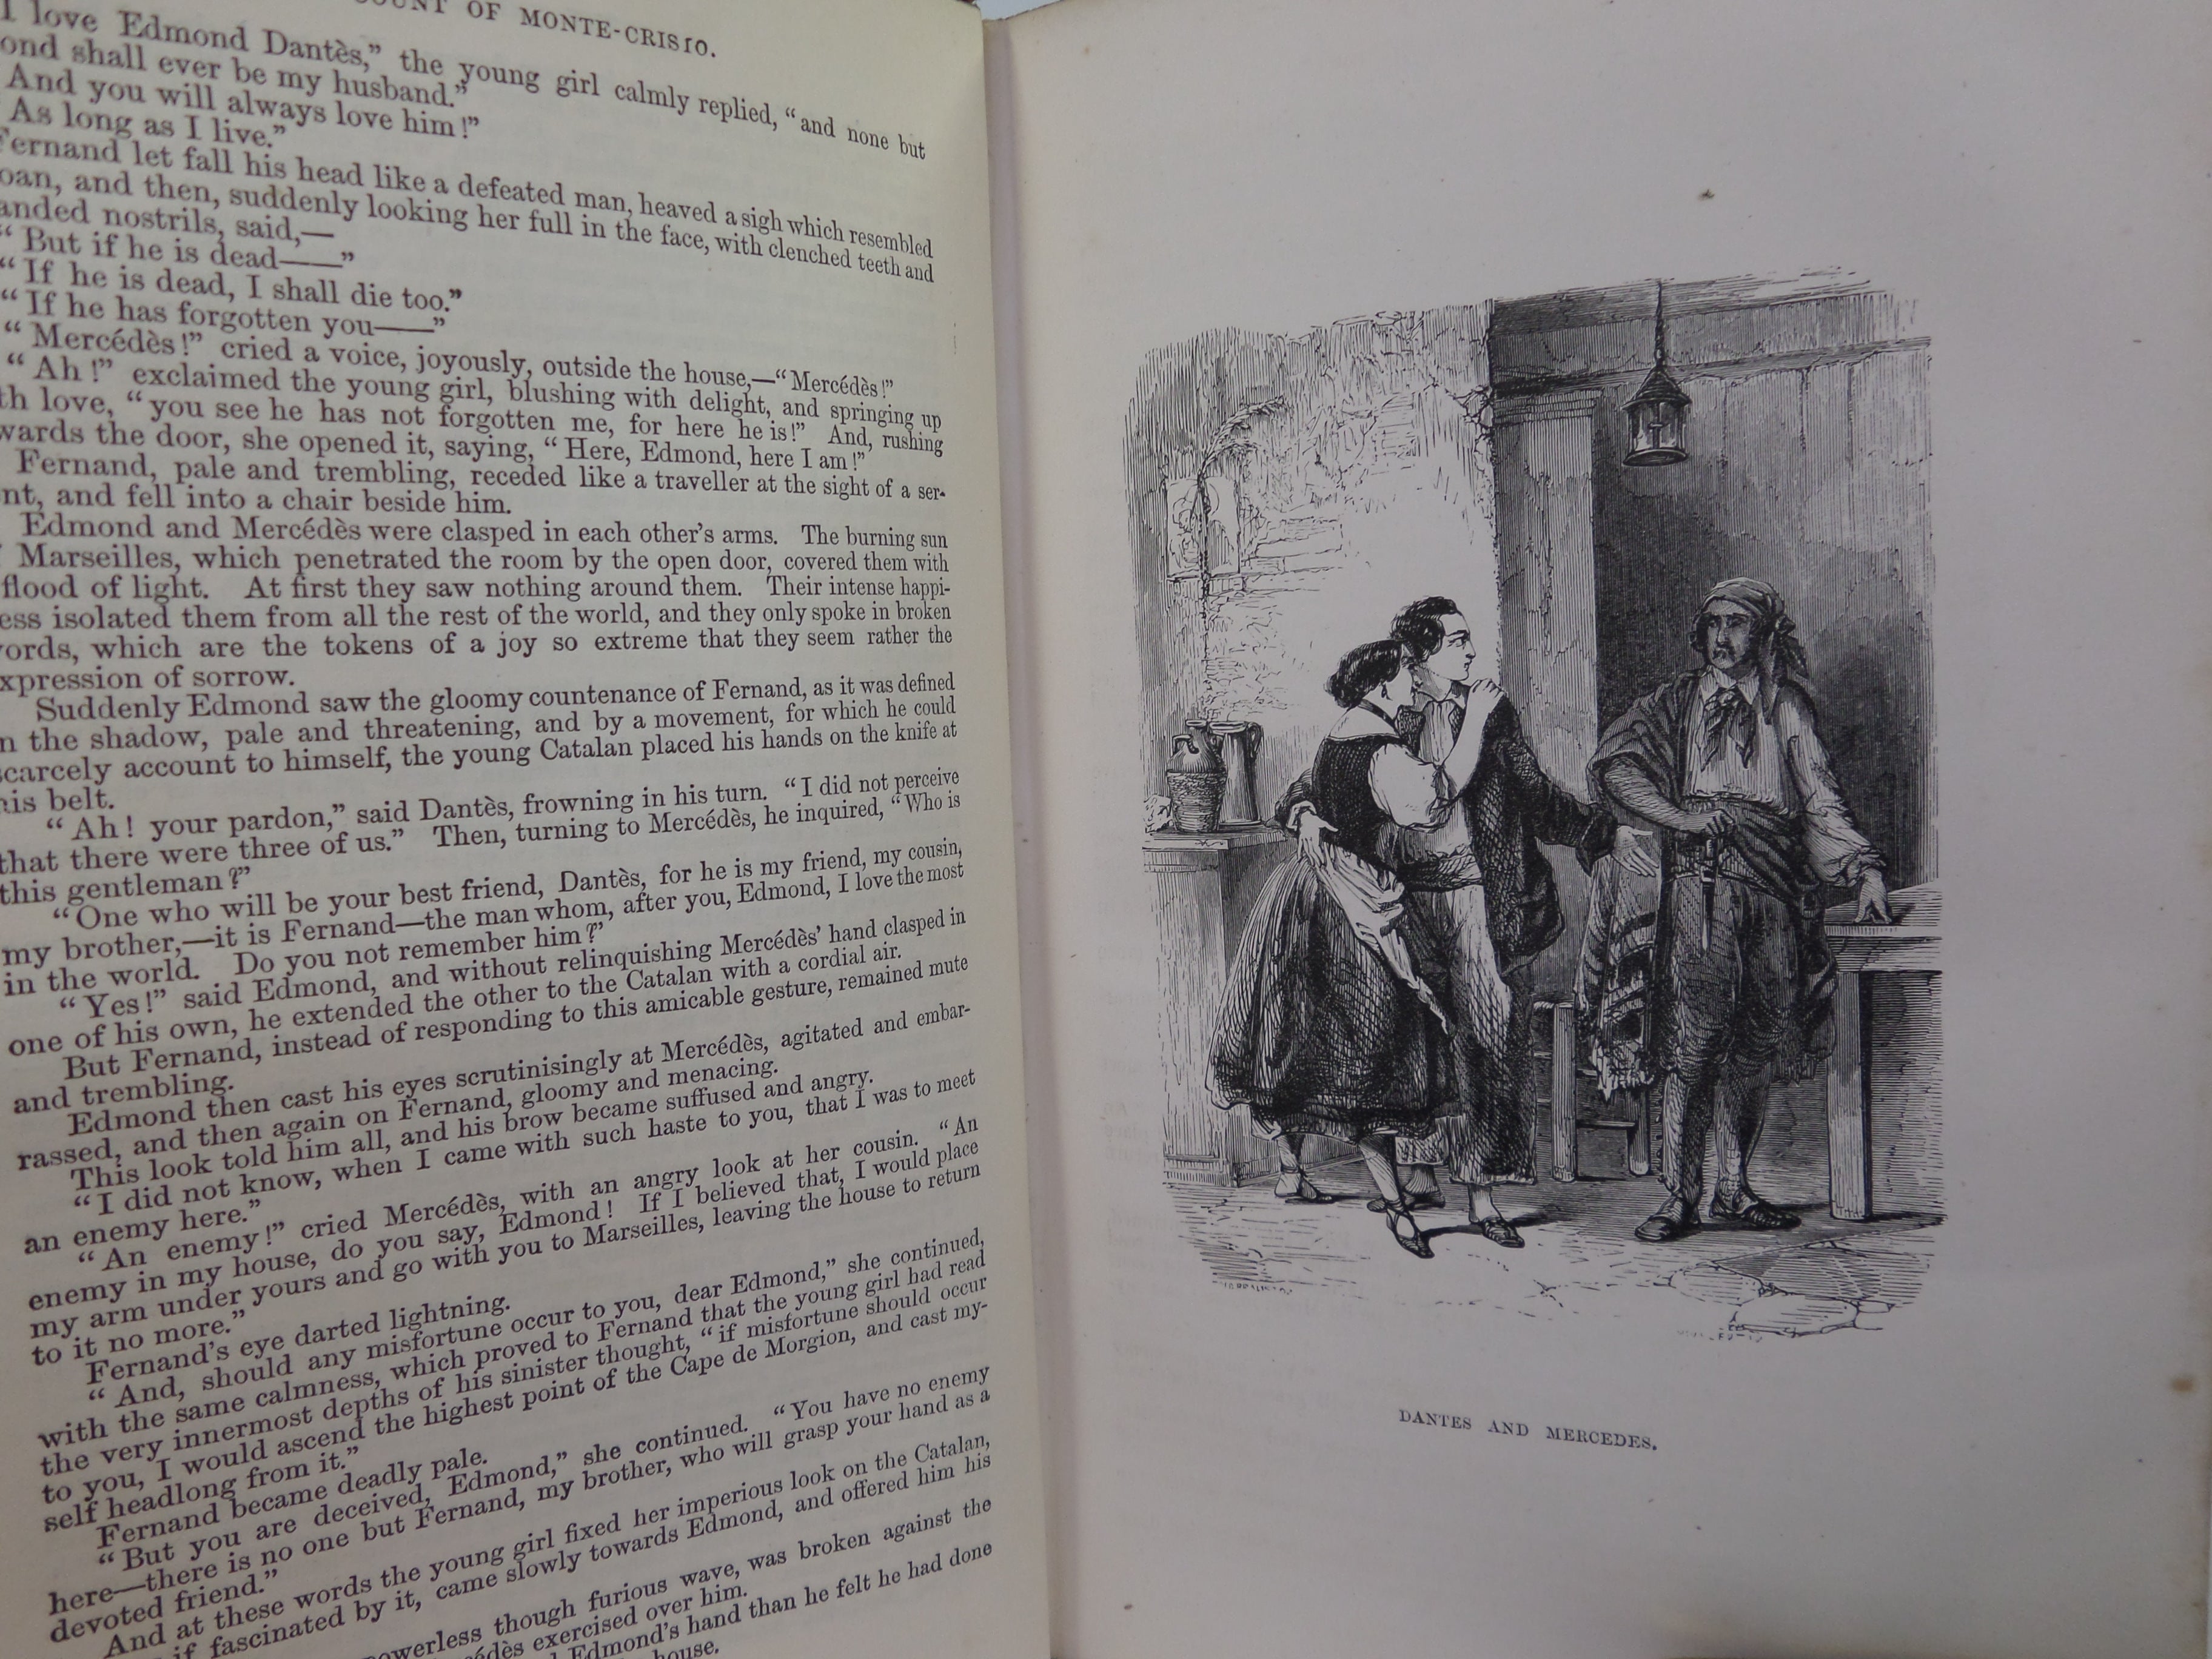 THE COUNT OF MONTE-CRISTO BY ALEXANDRE DUMAS 1871 ILLUSTRATED